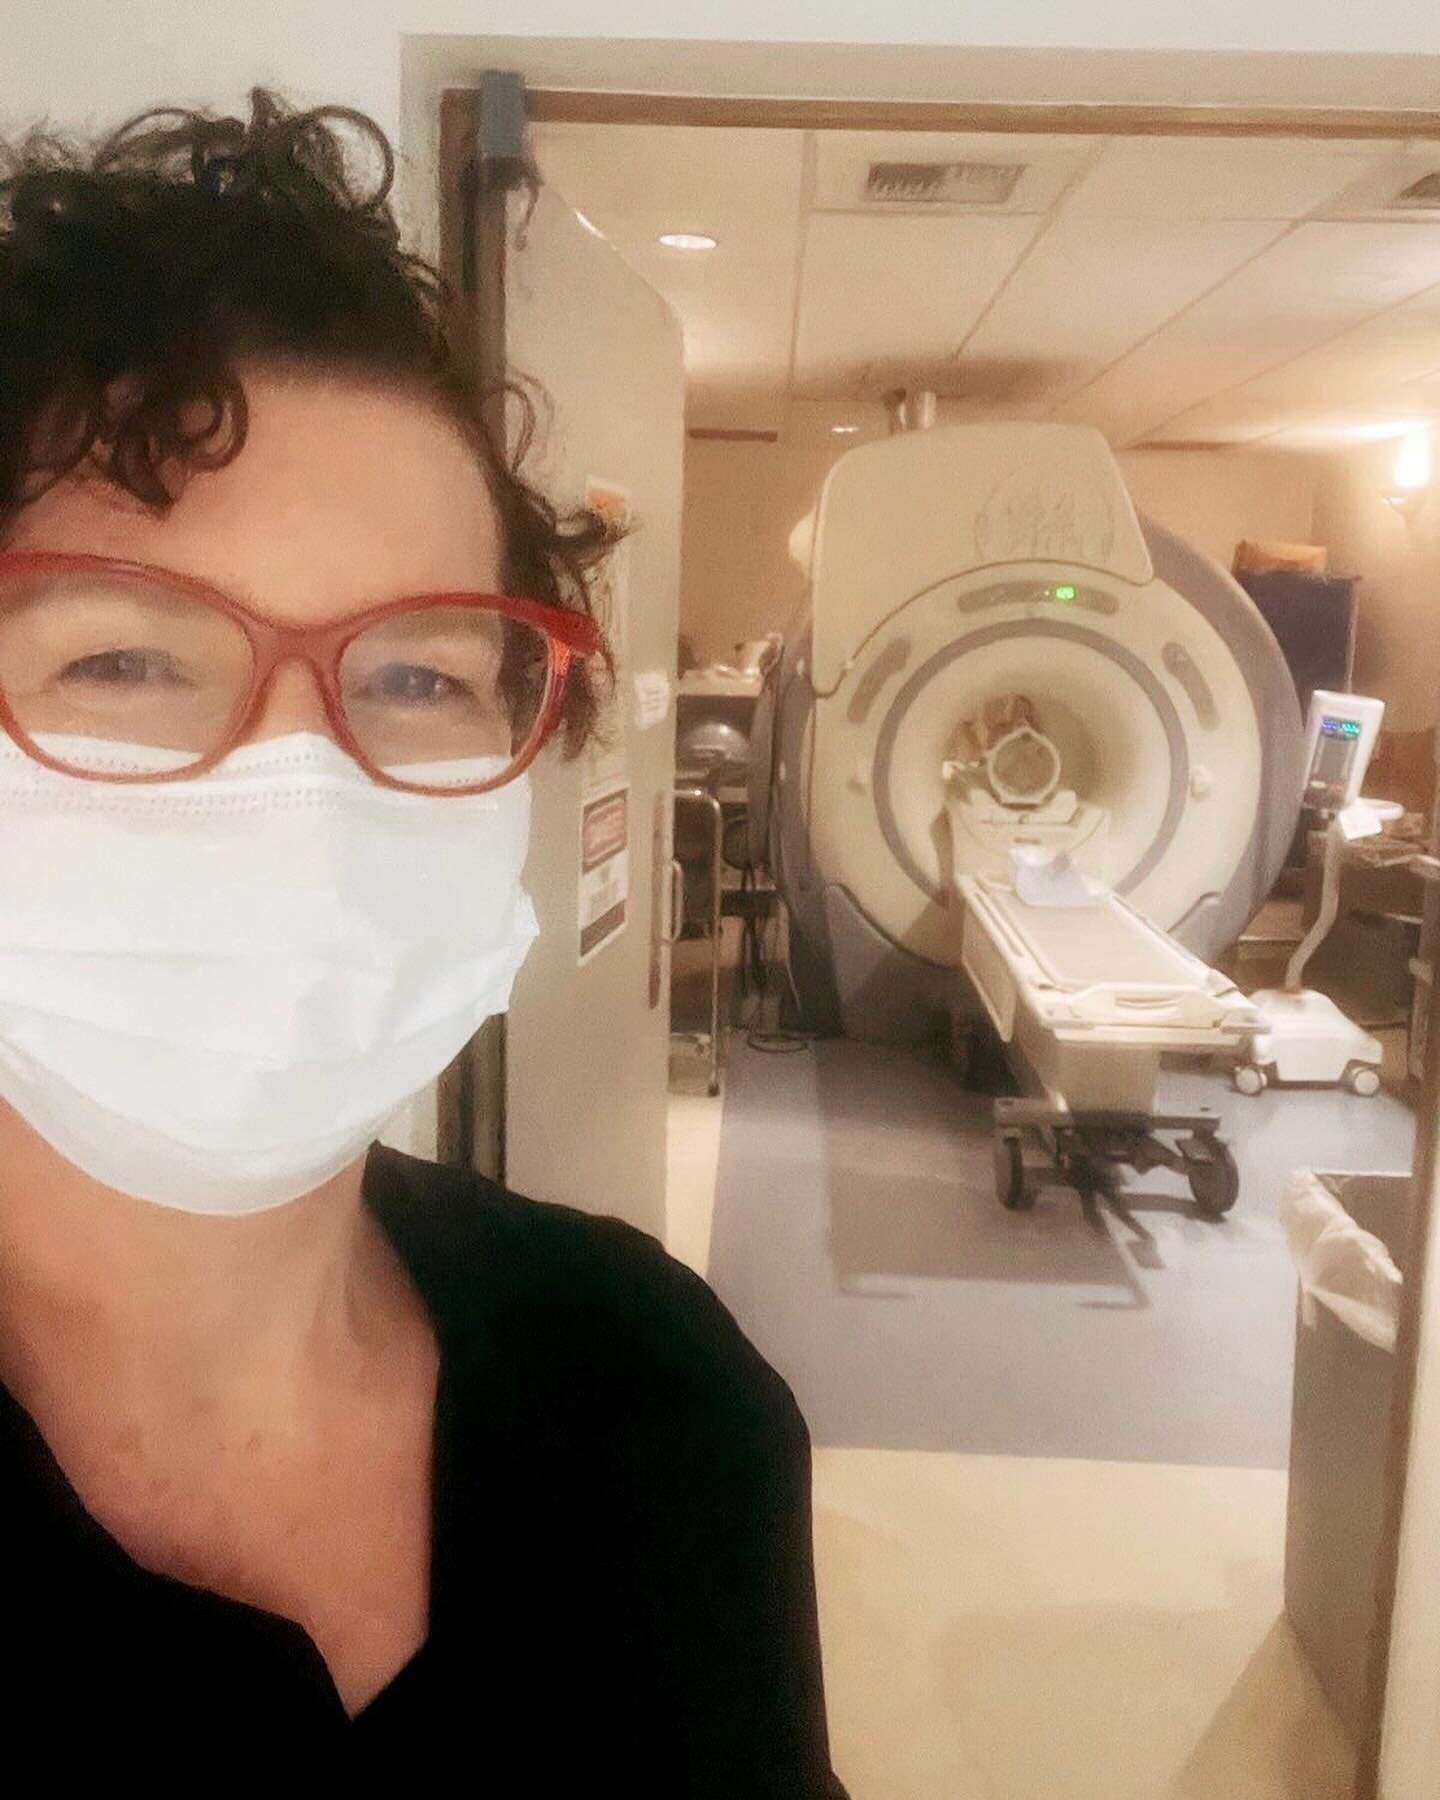 Hiii health update! First of all&mdash;MRI&rsquo;s. wow, it&rsquo;s a coffin of magnets!! 🙀 I was on the knife edge of a panic attack&mdash;but then I thought about my co-pay 💸 &amp; how it took me 3 months to get the MRI and I used every jedi mind